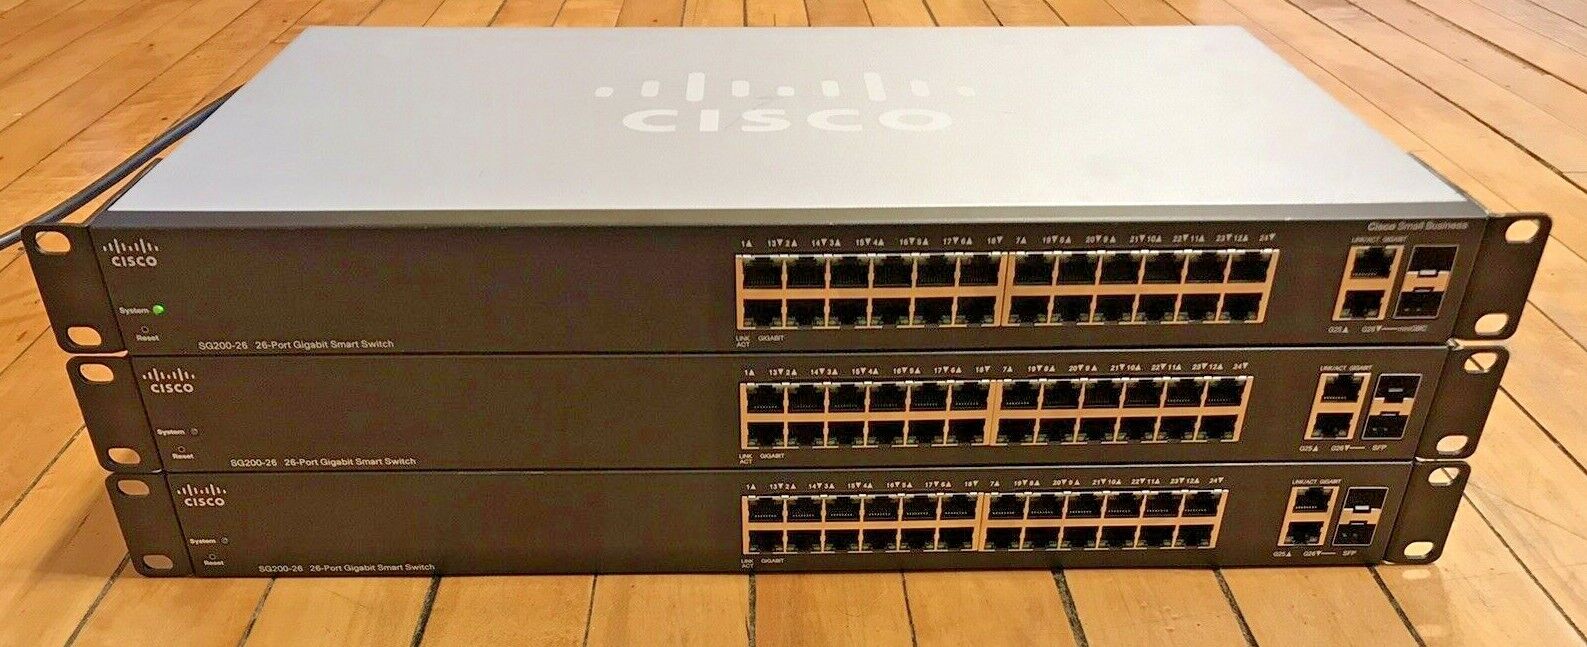 Lot of 3 Cisco SG200-26 26-Port Gigabit Smart Switches w/ Power Cords -For Parts